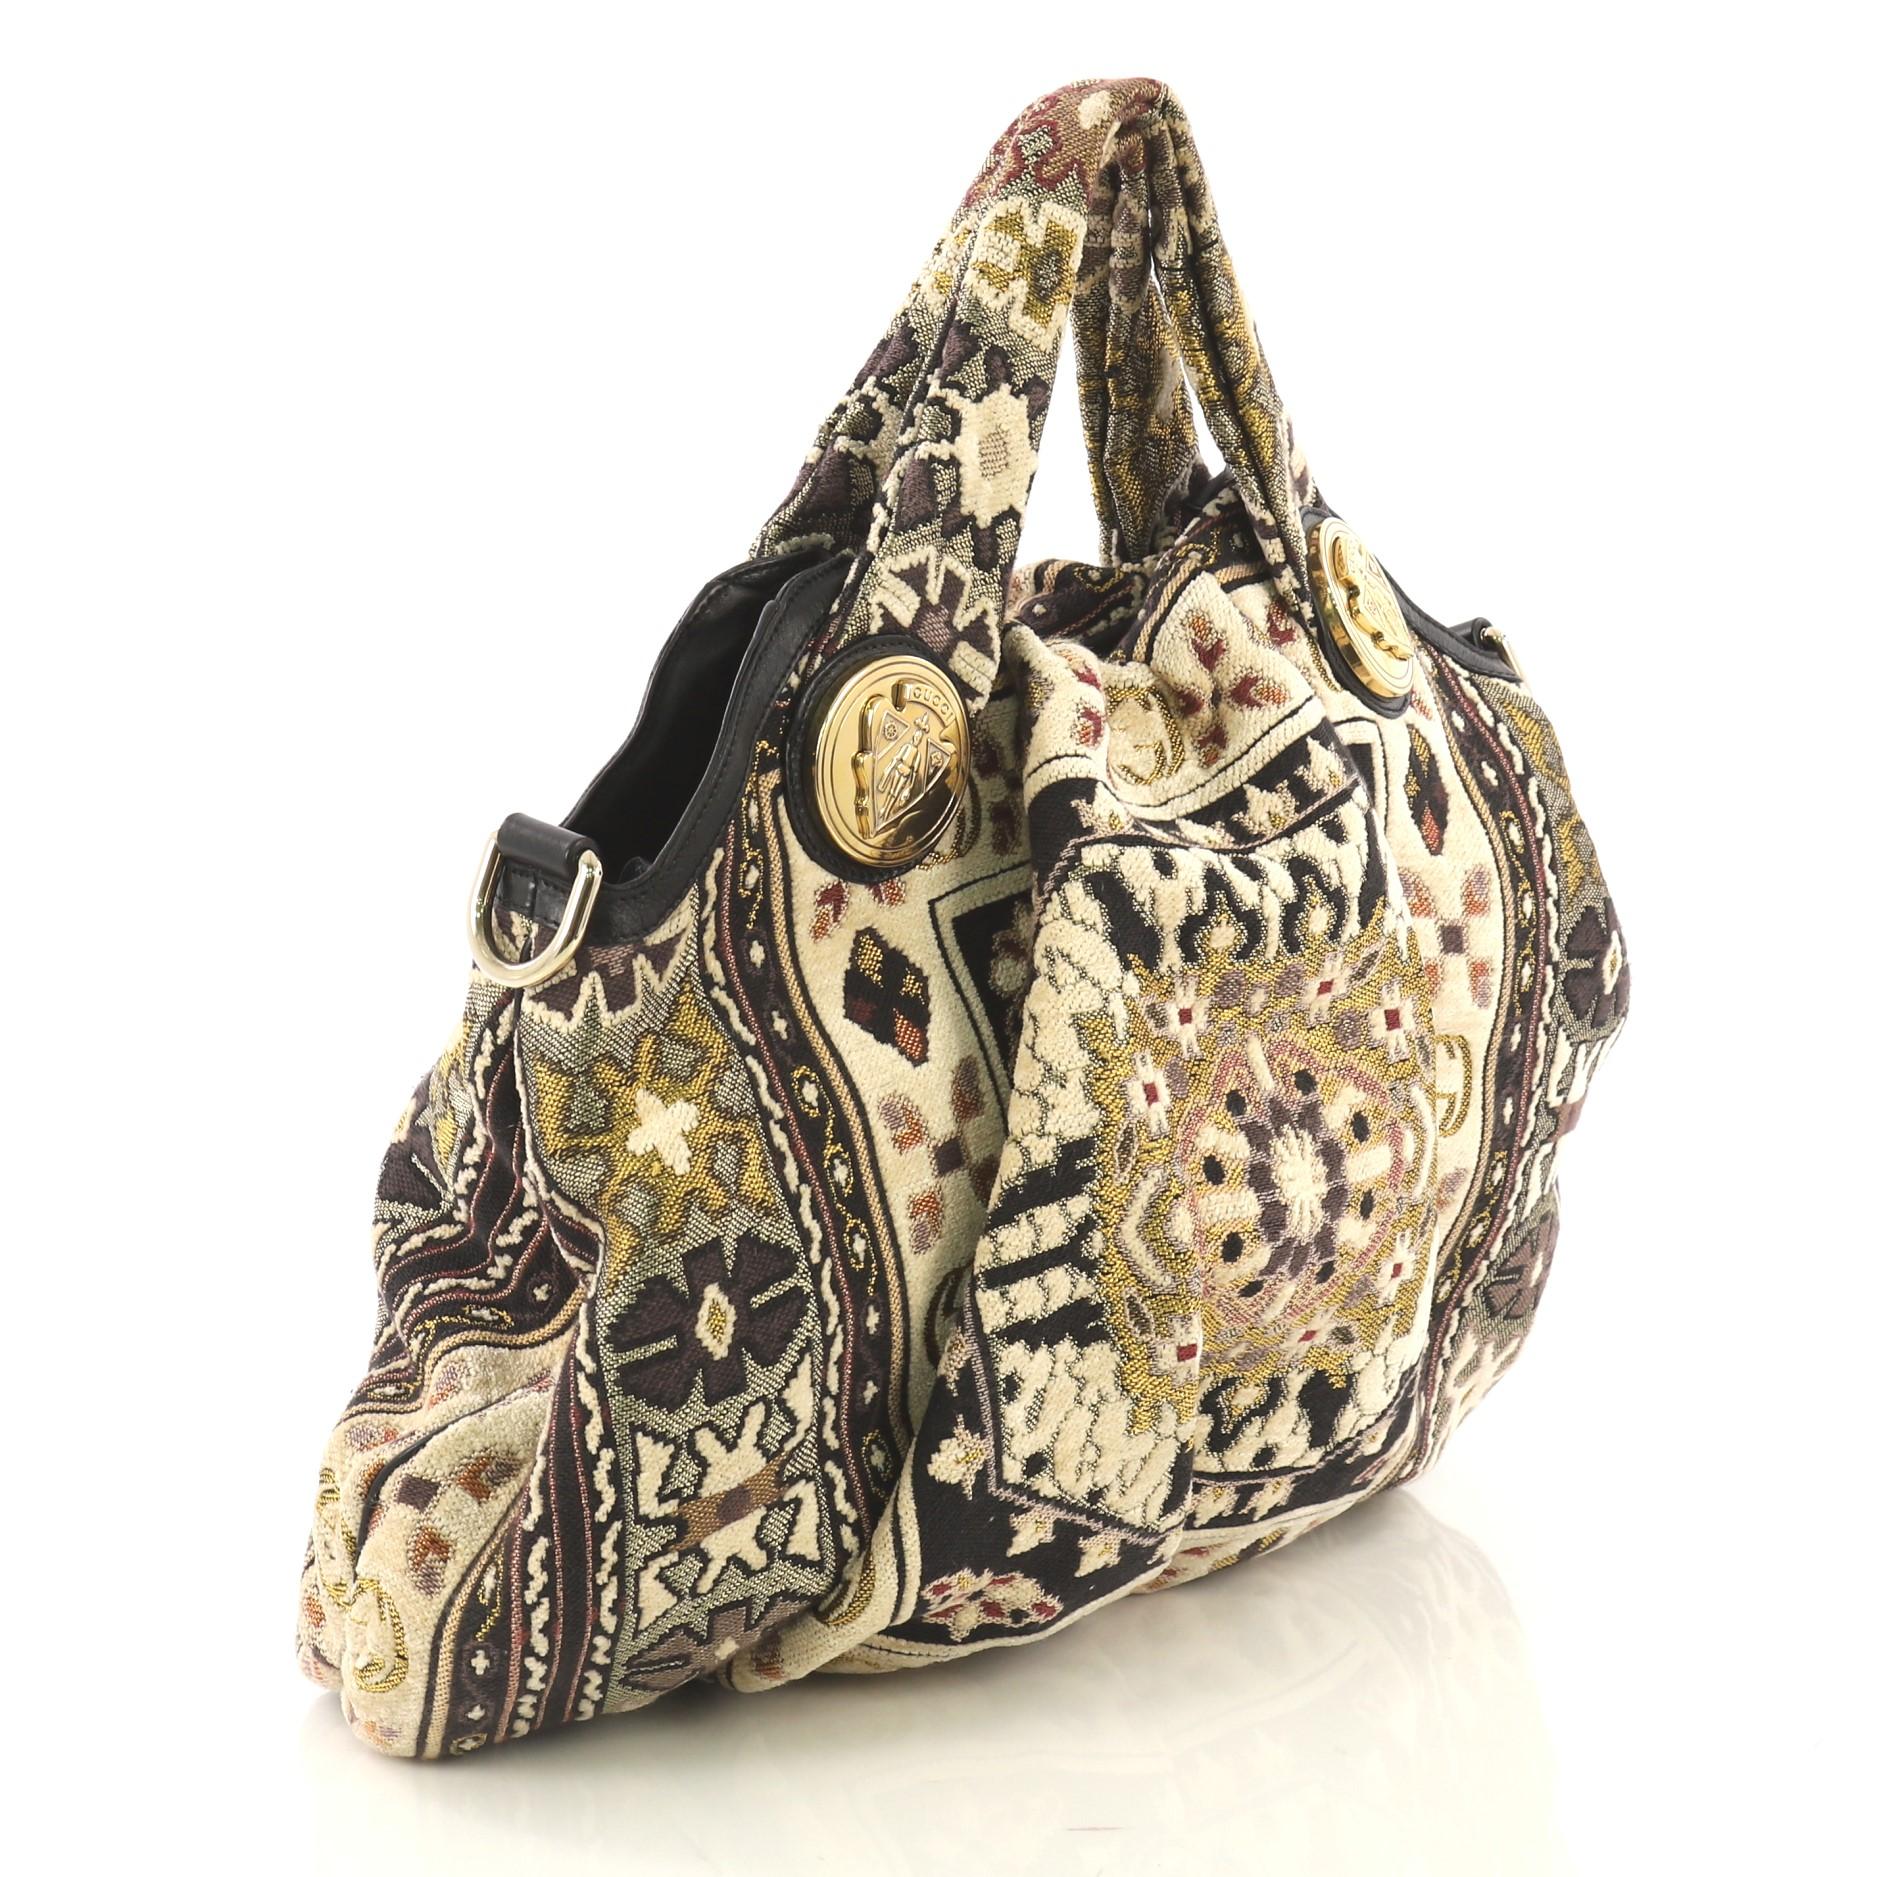 This Gucci Hysteria Convertible Top Handle Bag Tapestry Medium, crafted from multicolor tapestry, features dual shoulder straps with Gucci emblems, pleated silhouette, and gold-tone hardware. Its magnetic snap closure opens to a black fabric